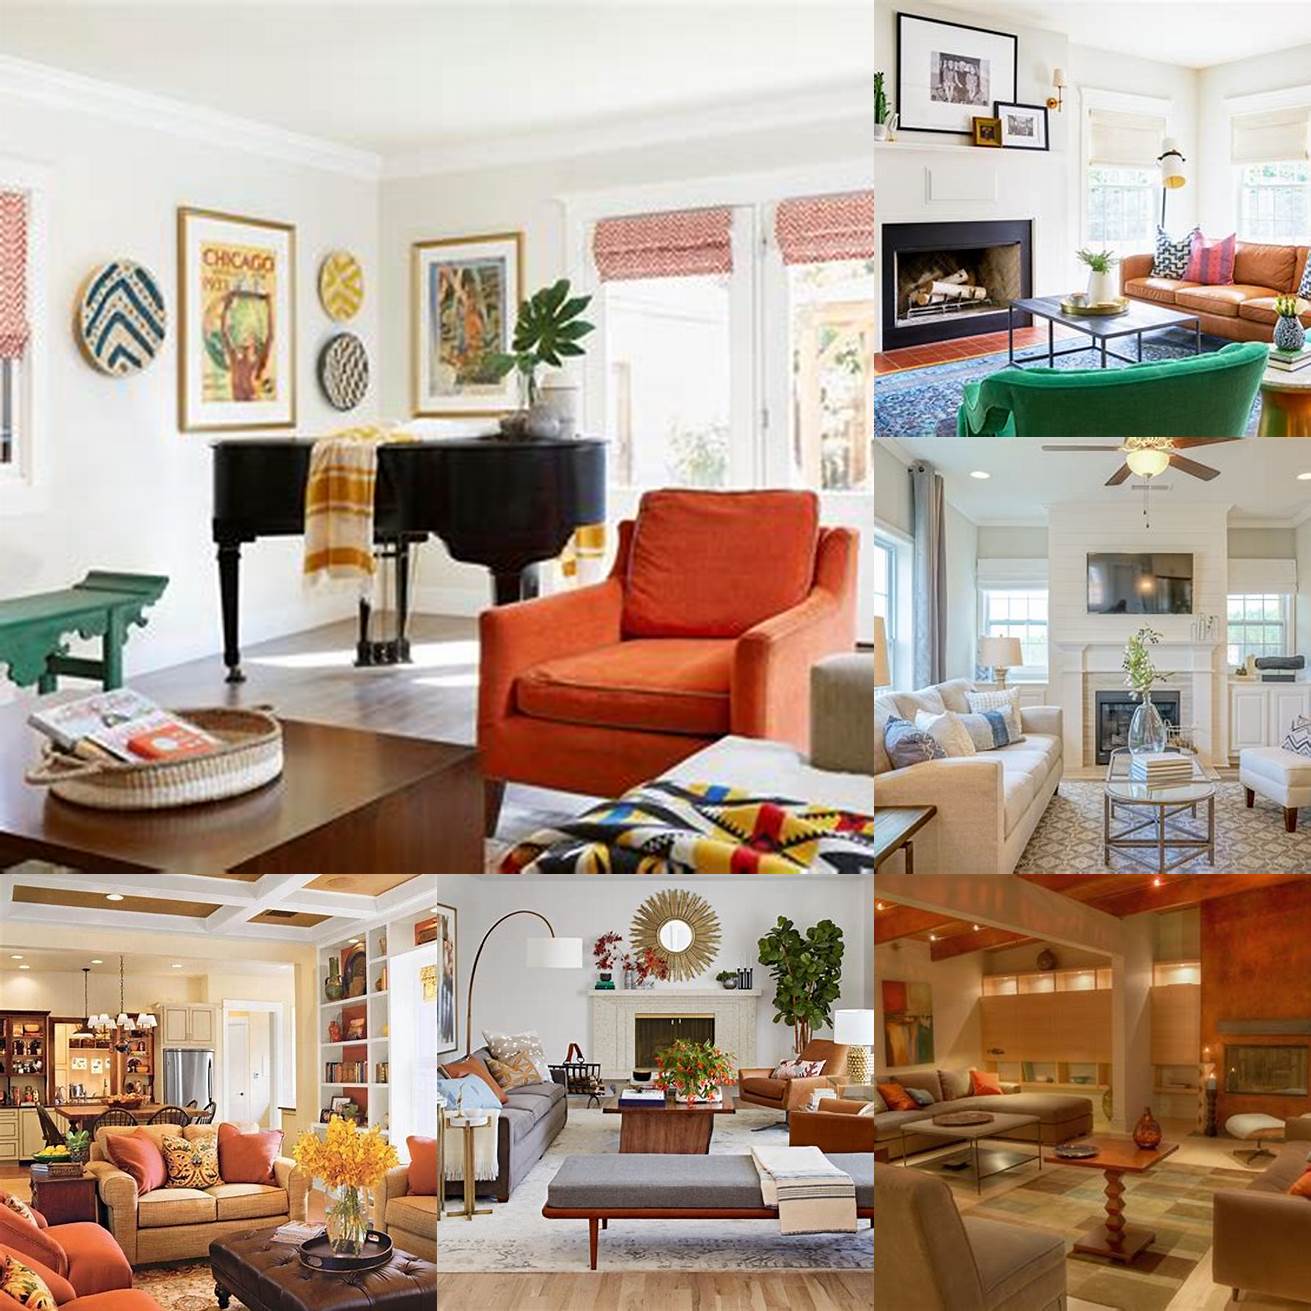 Warm and inviting living room with neutral tones and pops of color